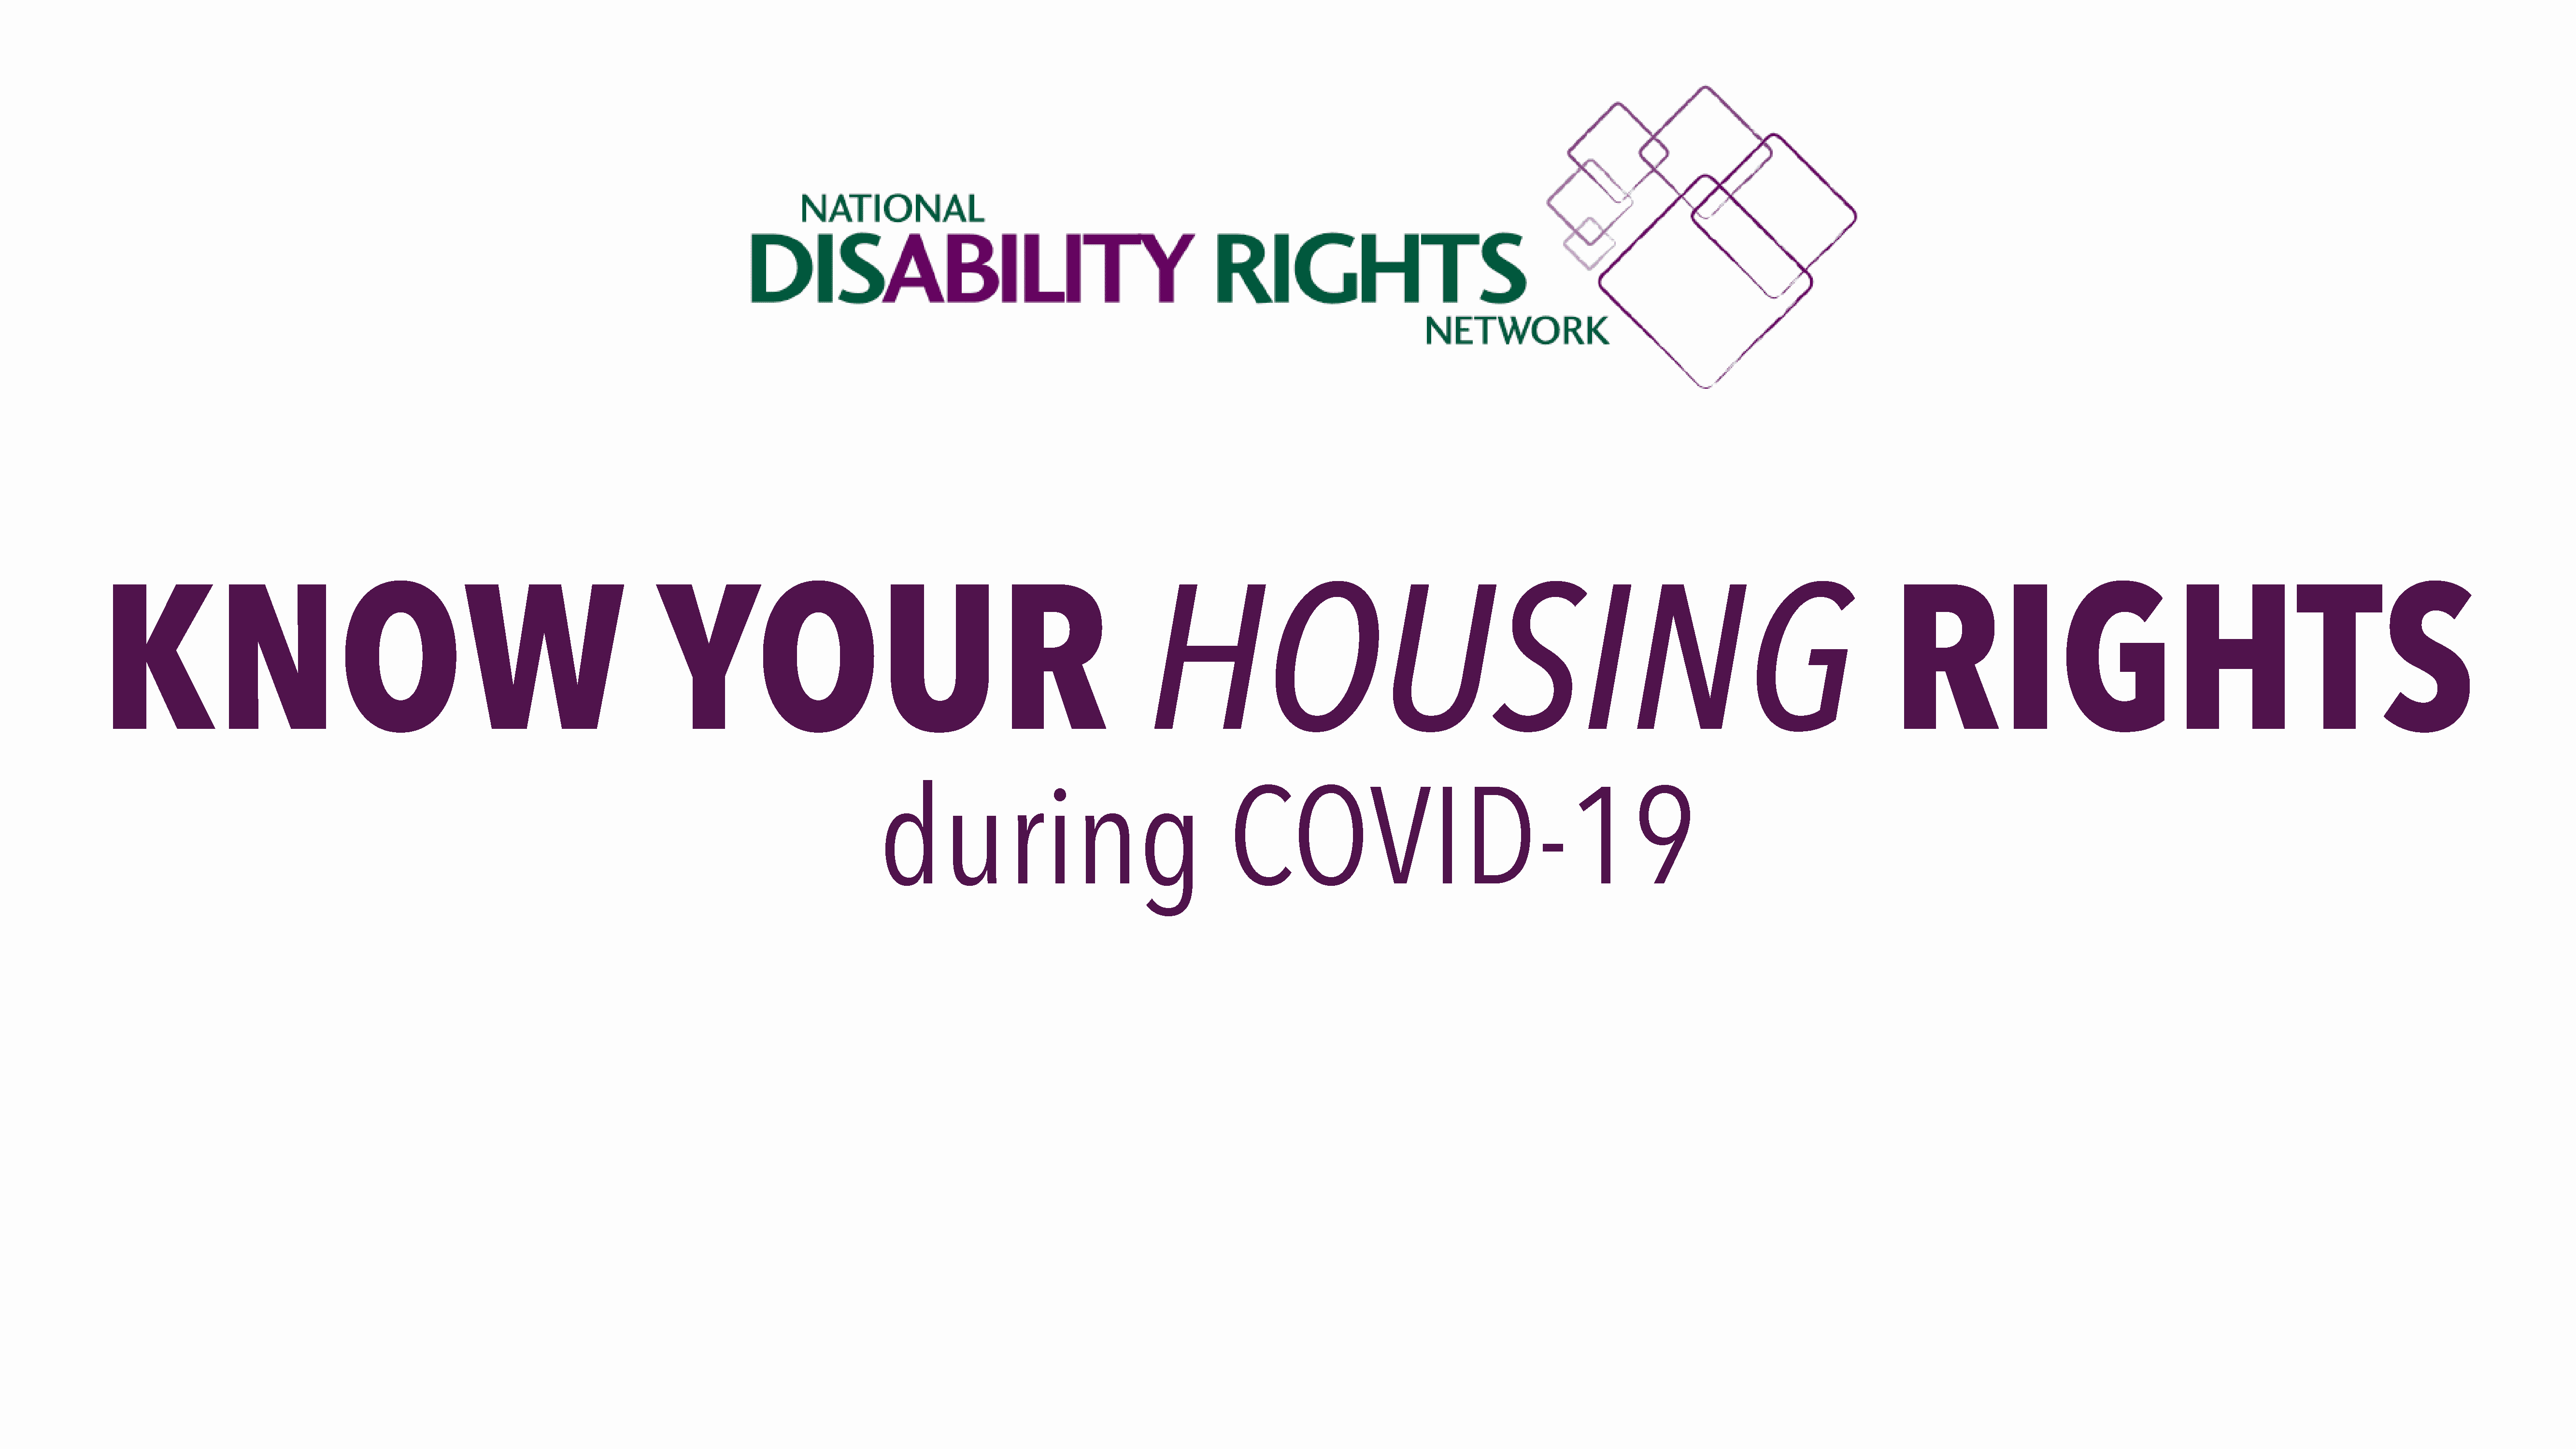 NDRN logo with "Know Your Housing Rights during COVID-19" in large text